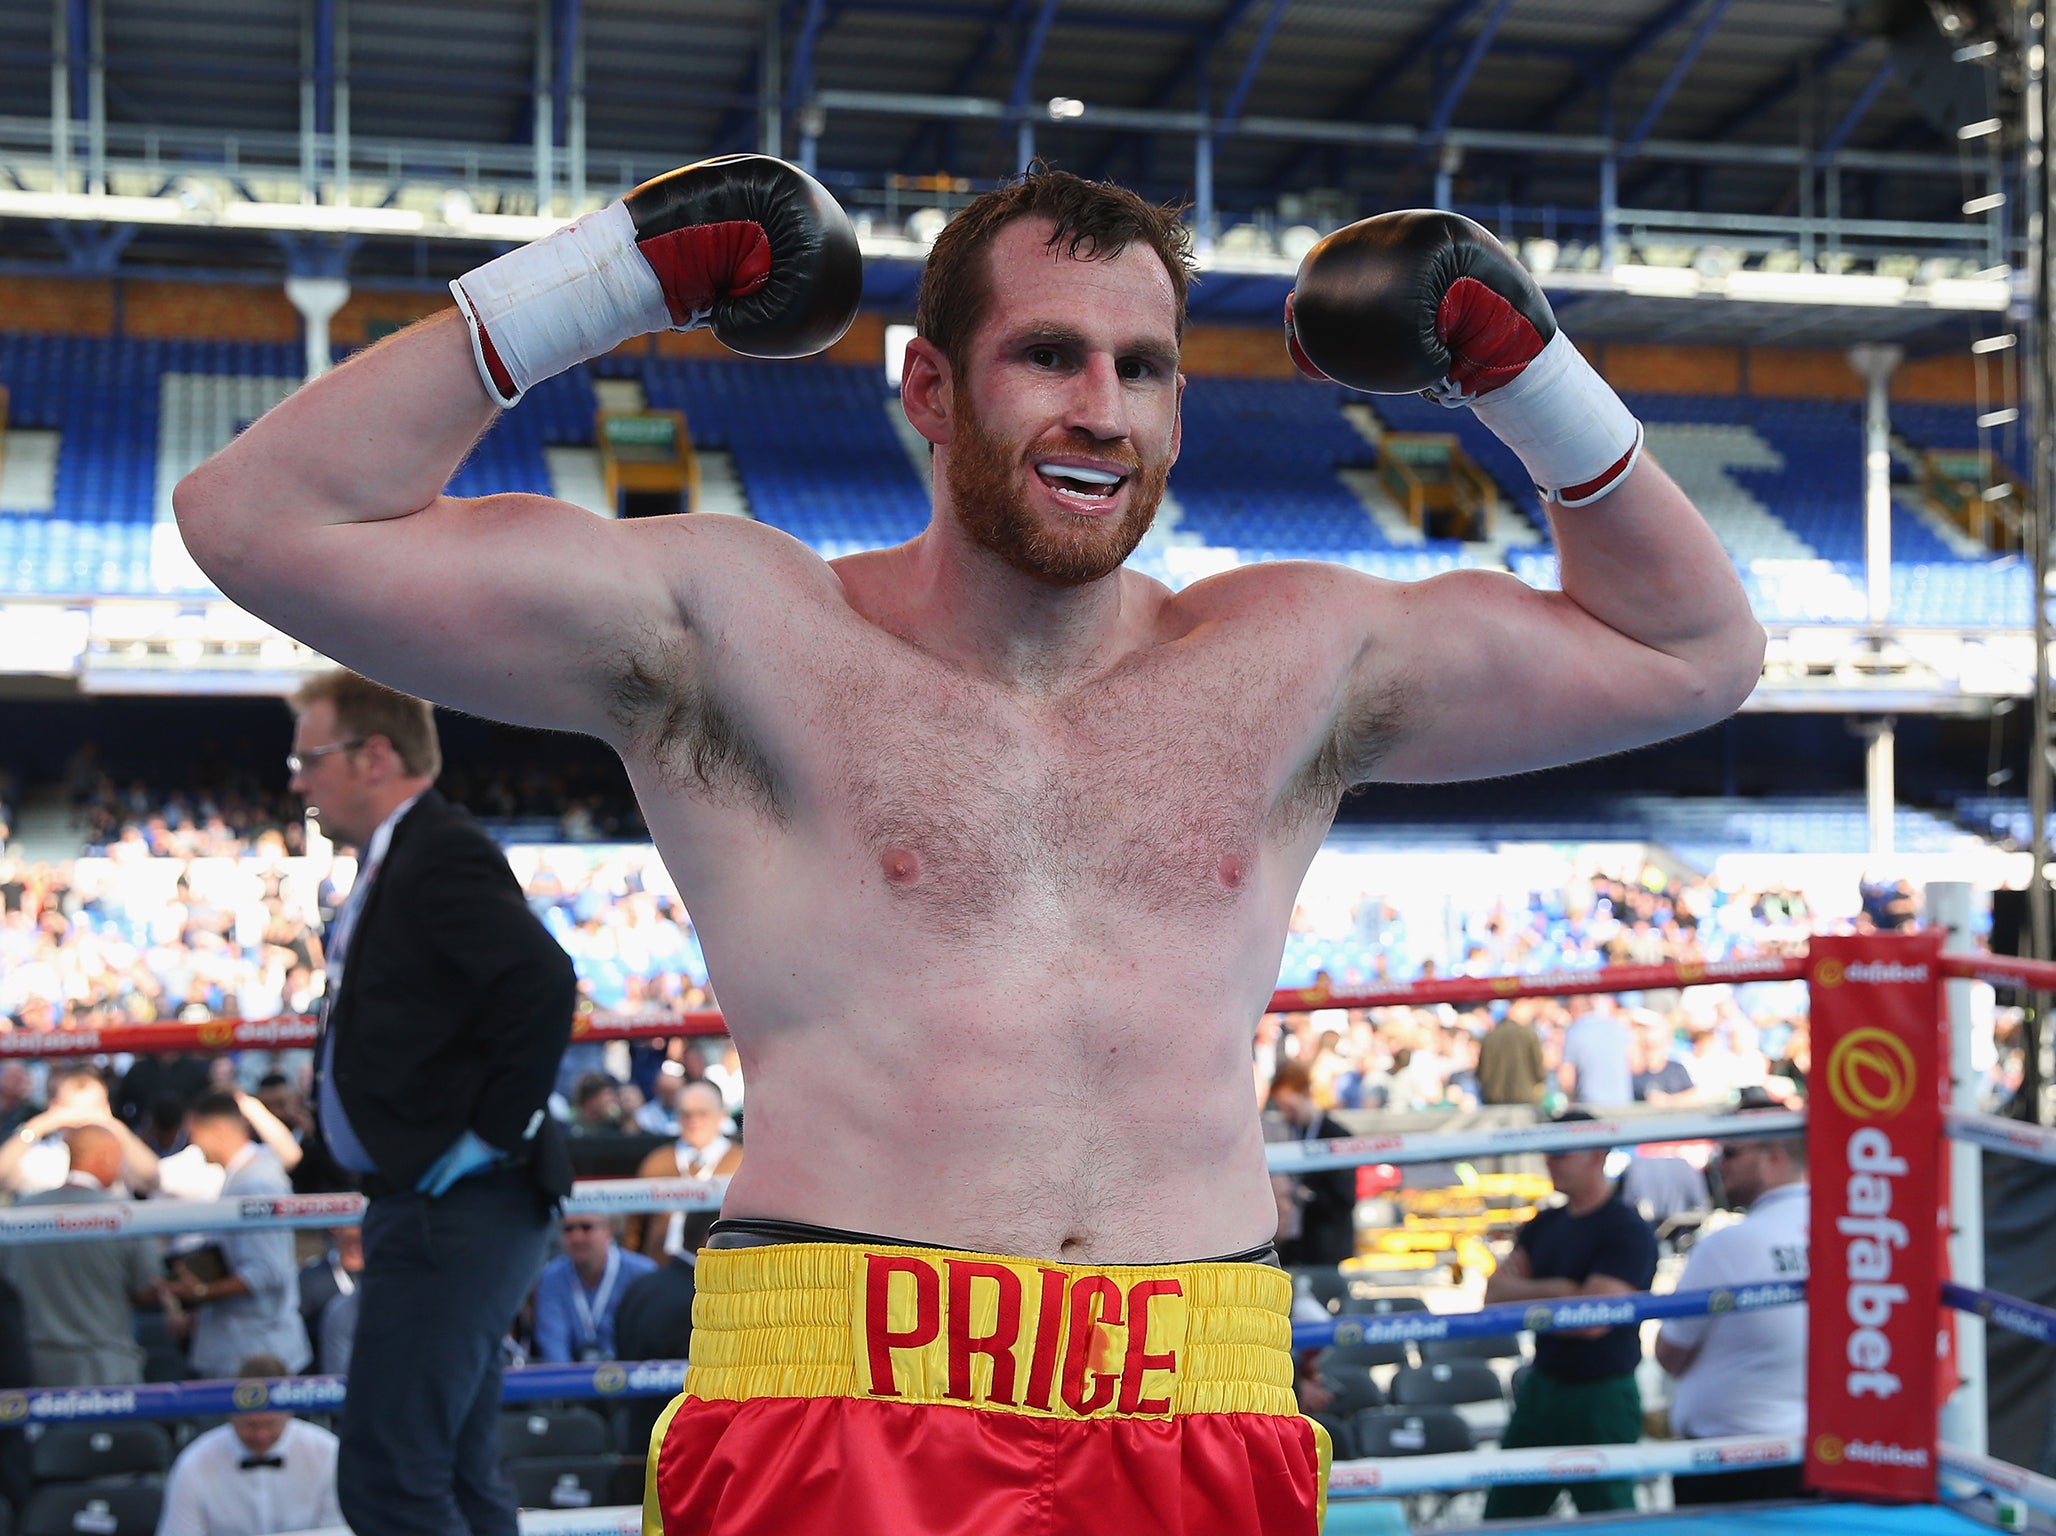 David Price has a professional record of 22-4